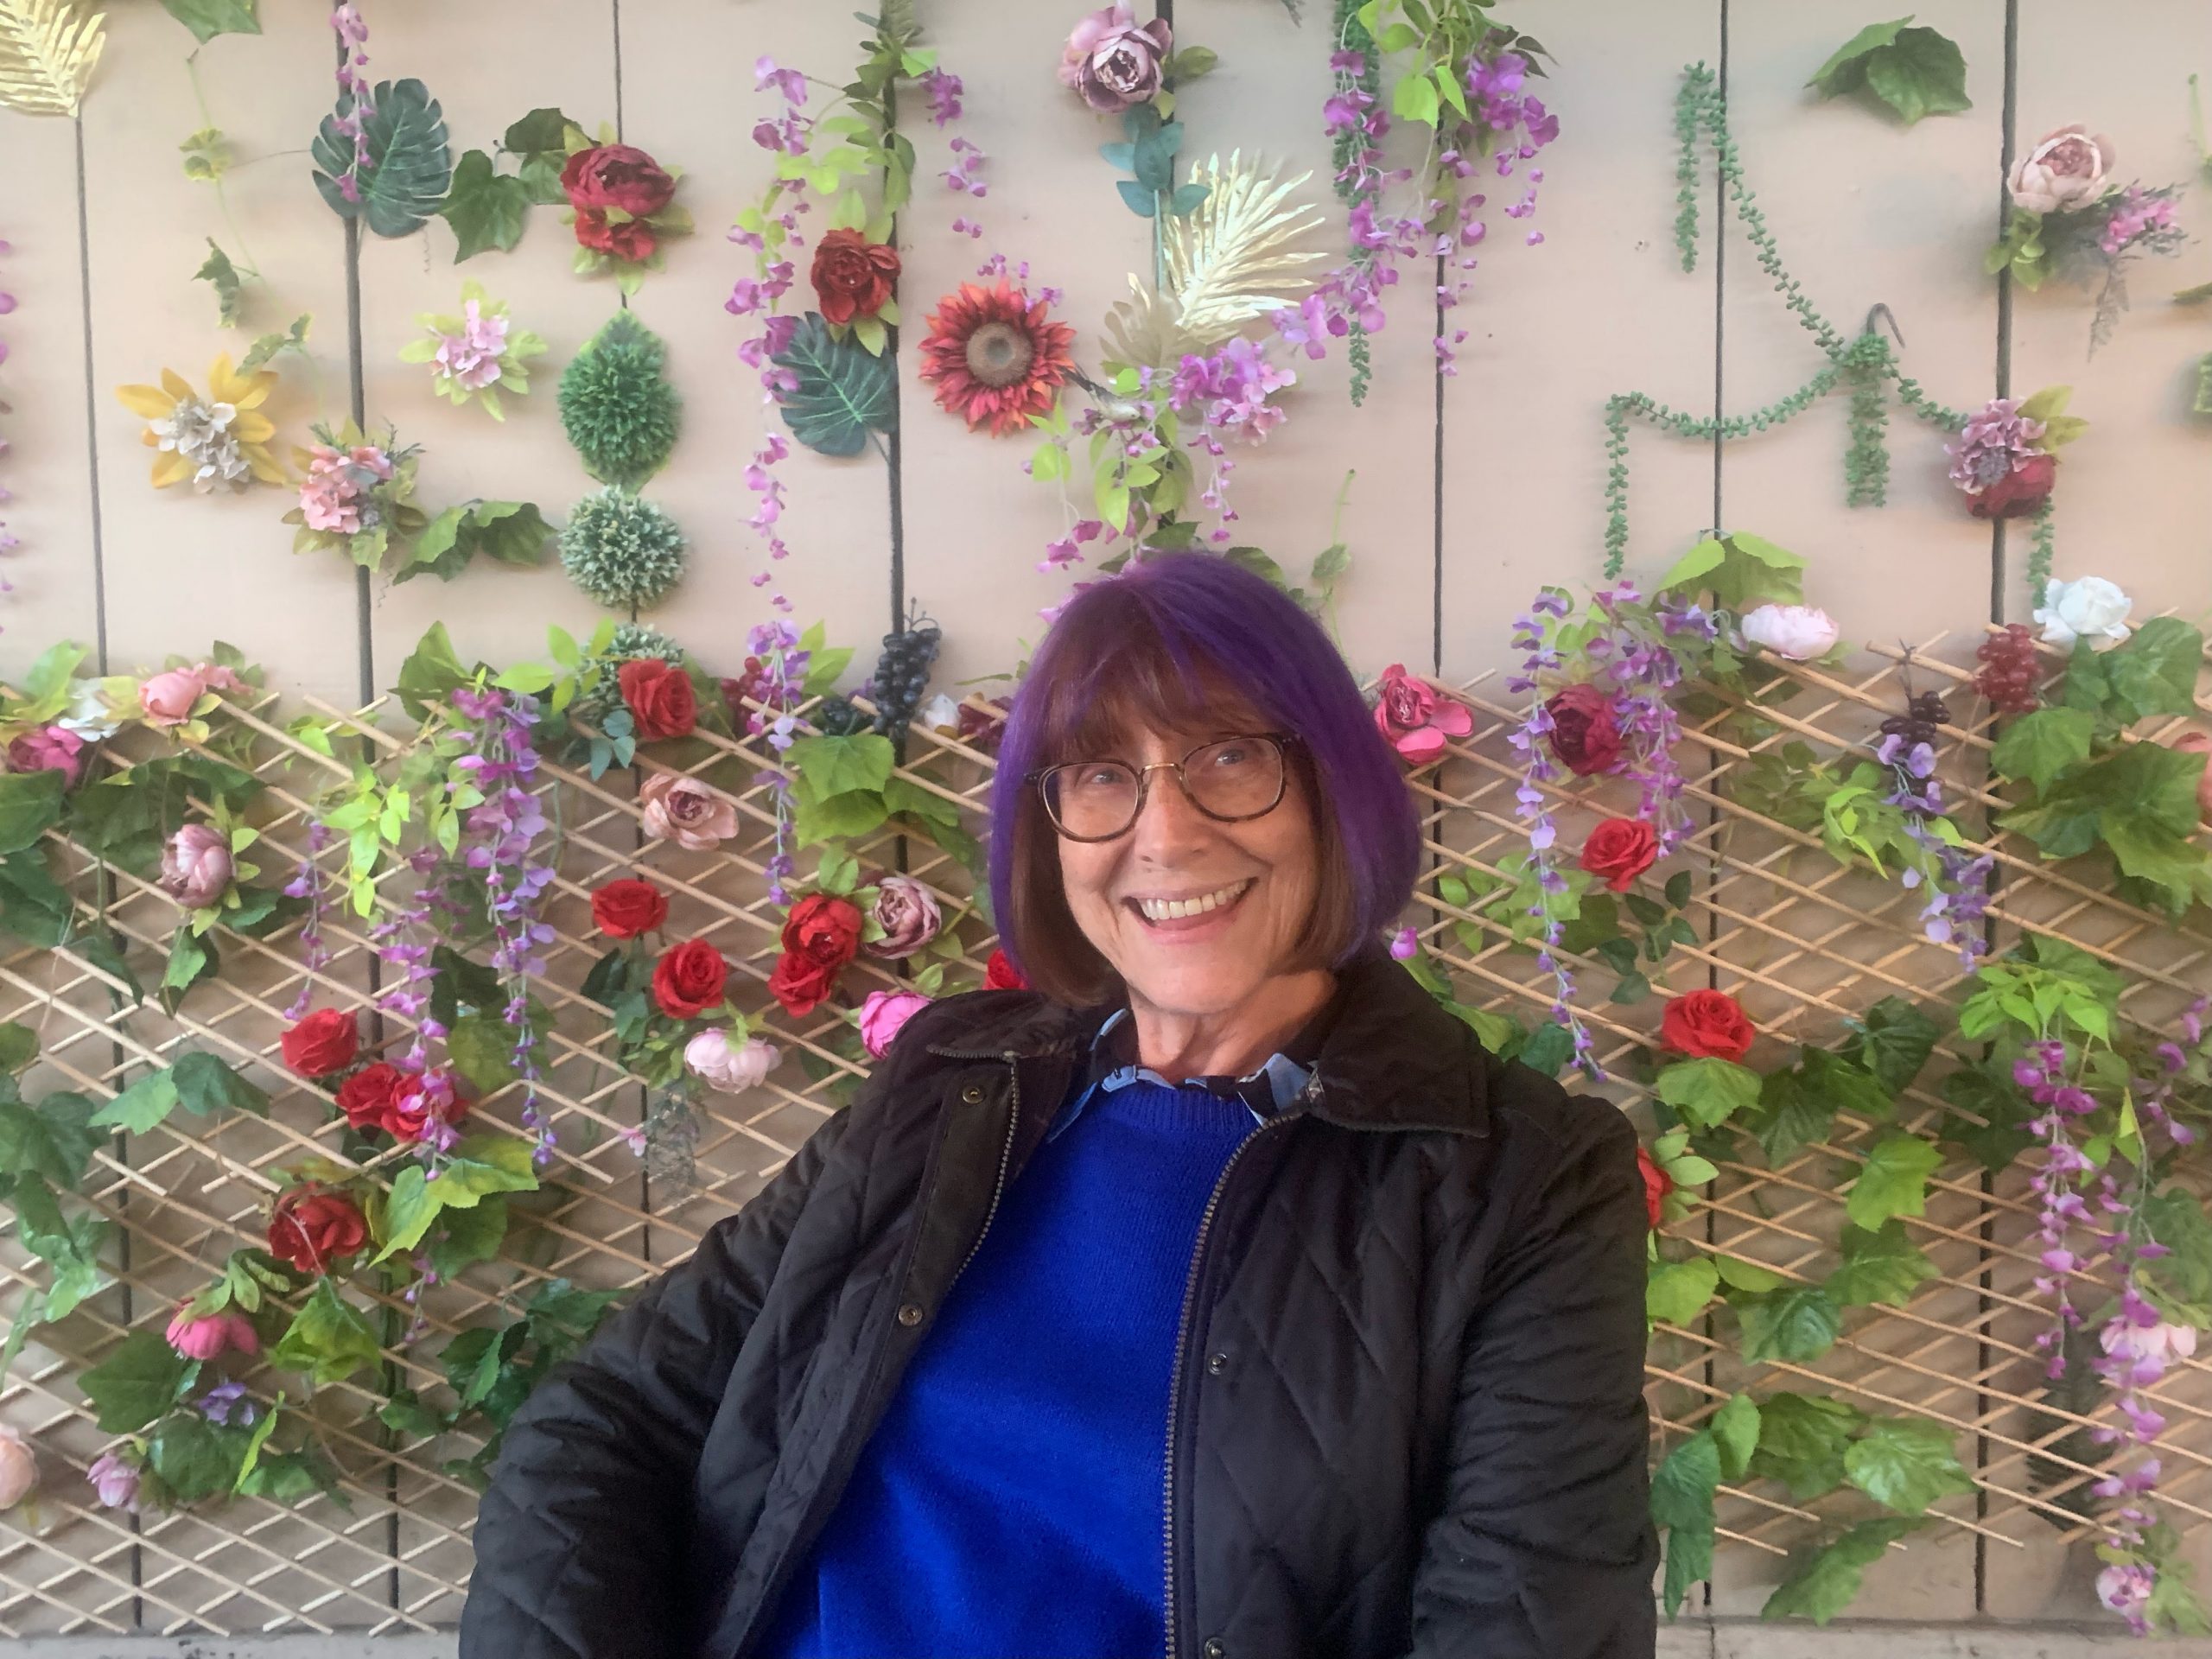 woman in blue top and jacket, with purple bobbed hairstyle, sitting in front of a colourful flower wall. she is looking at the camera and smiling